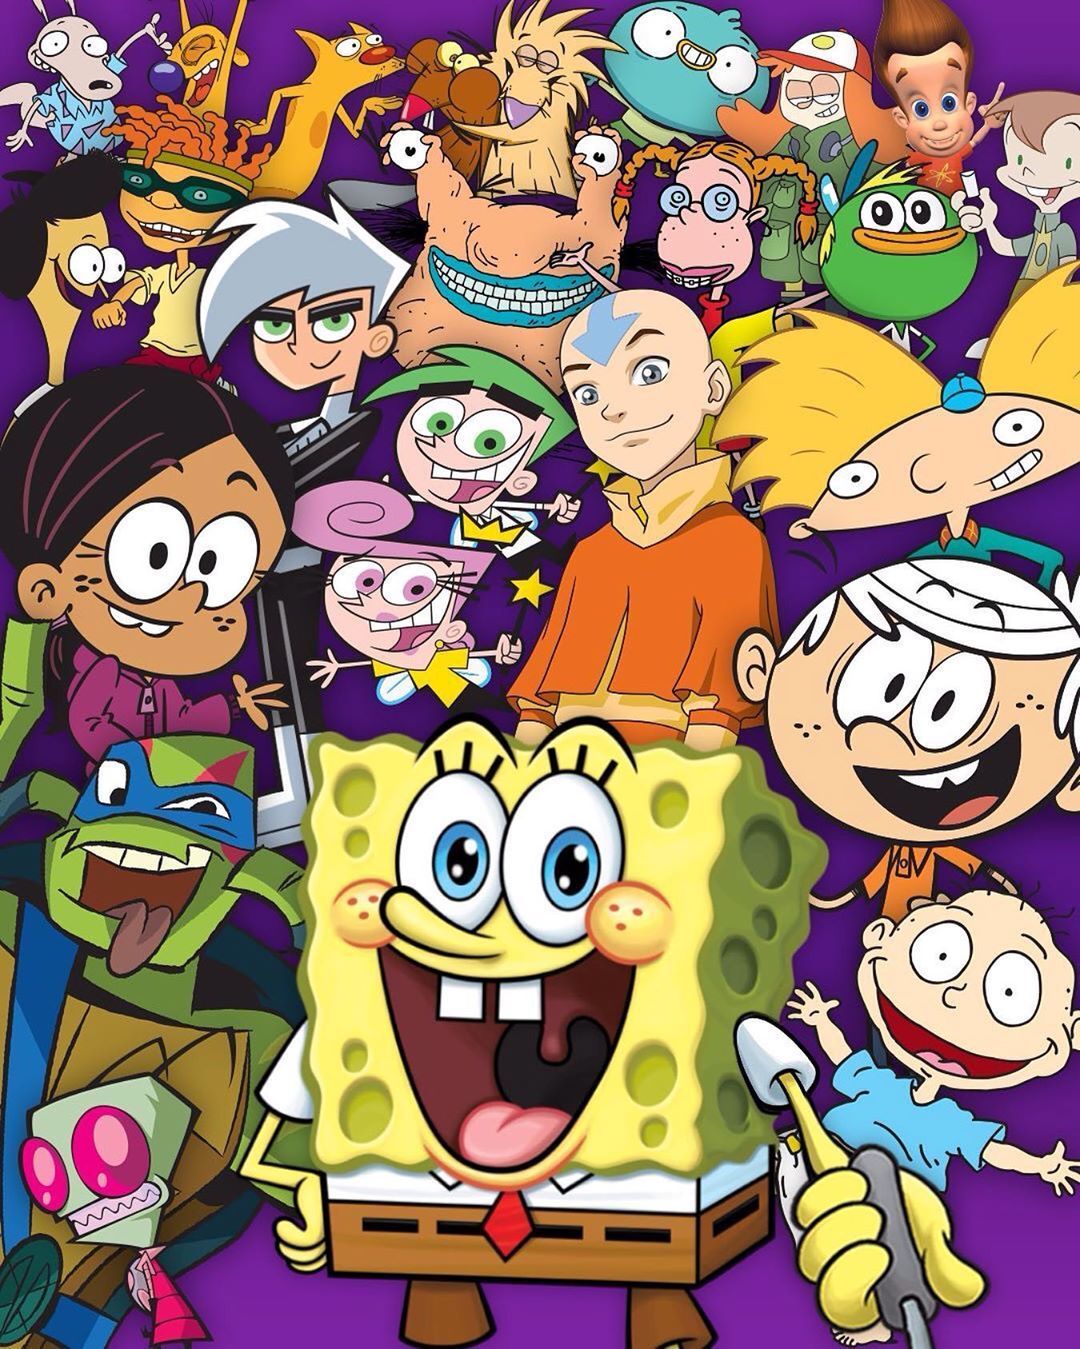 NickALive! on Instagram: “The #Nickelodeon fam is all here for #InternationalAnimationDay! ❤️ Which #Nick. Nickelodeon cartoons, Cartoon art, Good vibes wallpaper